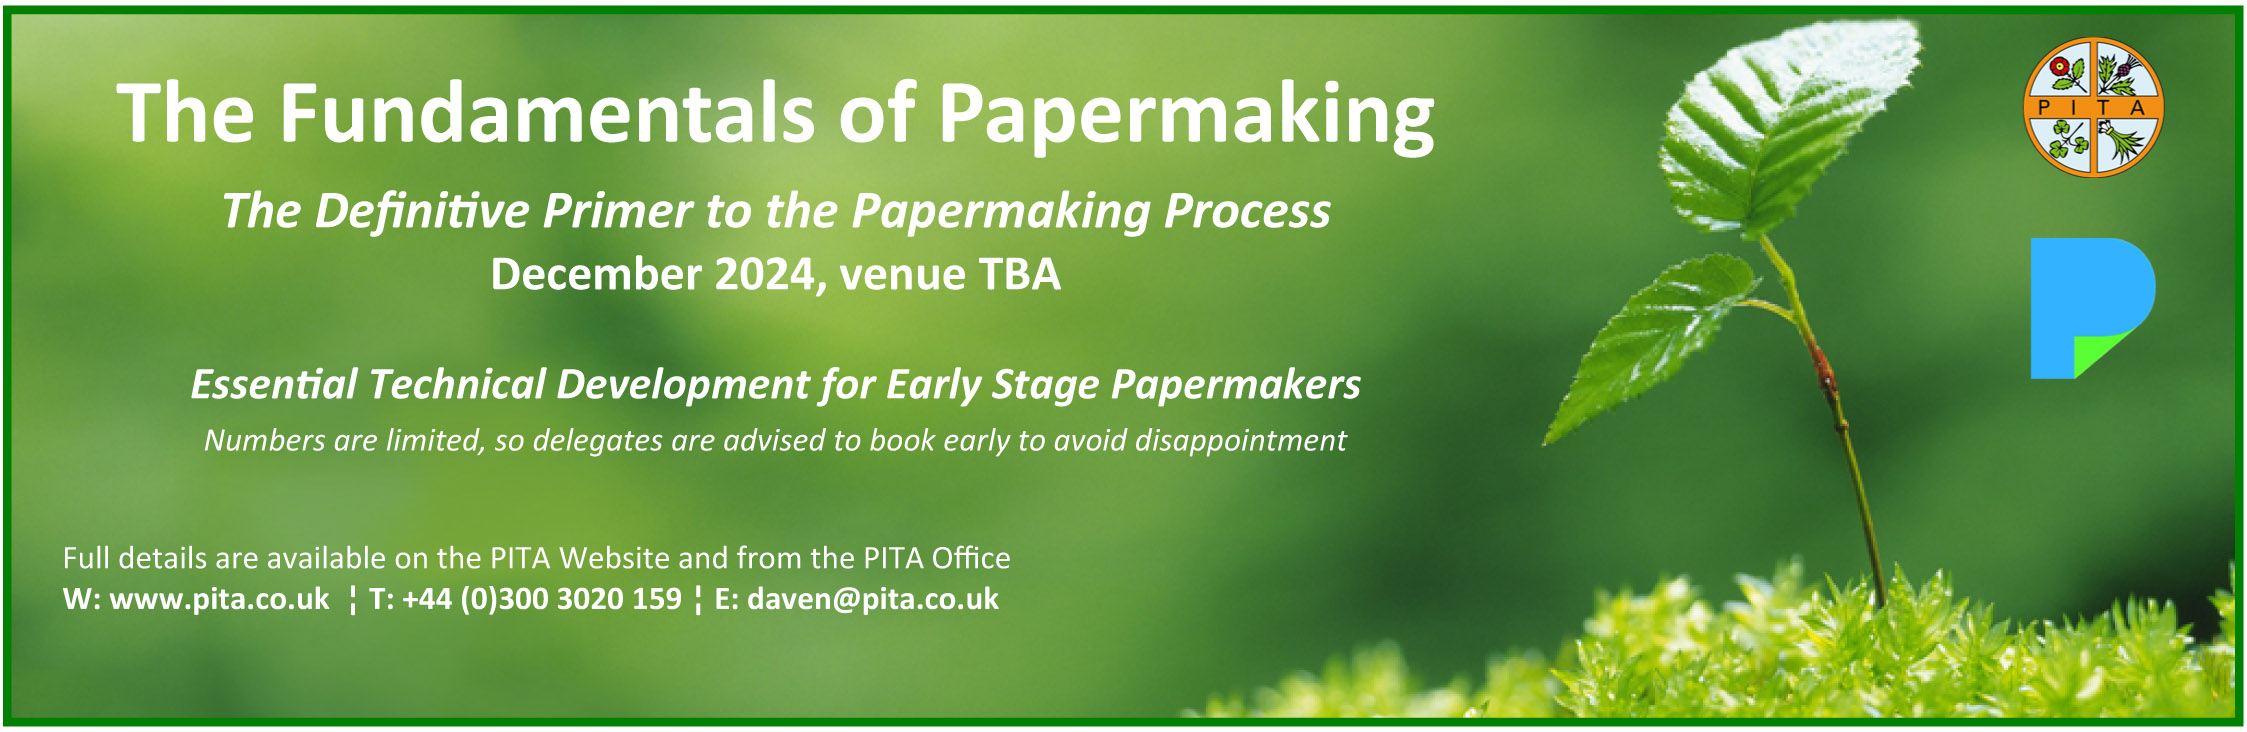 Fundamentals of Papermaking Banner Ad Dec 2024 updated contact